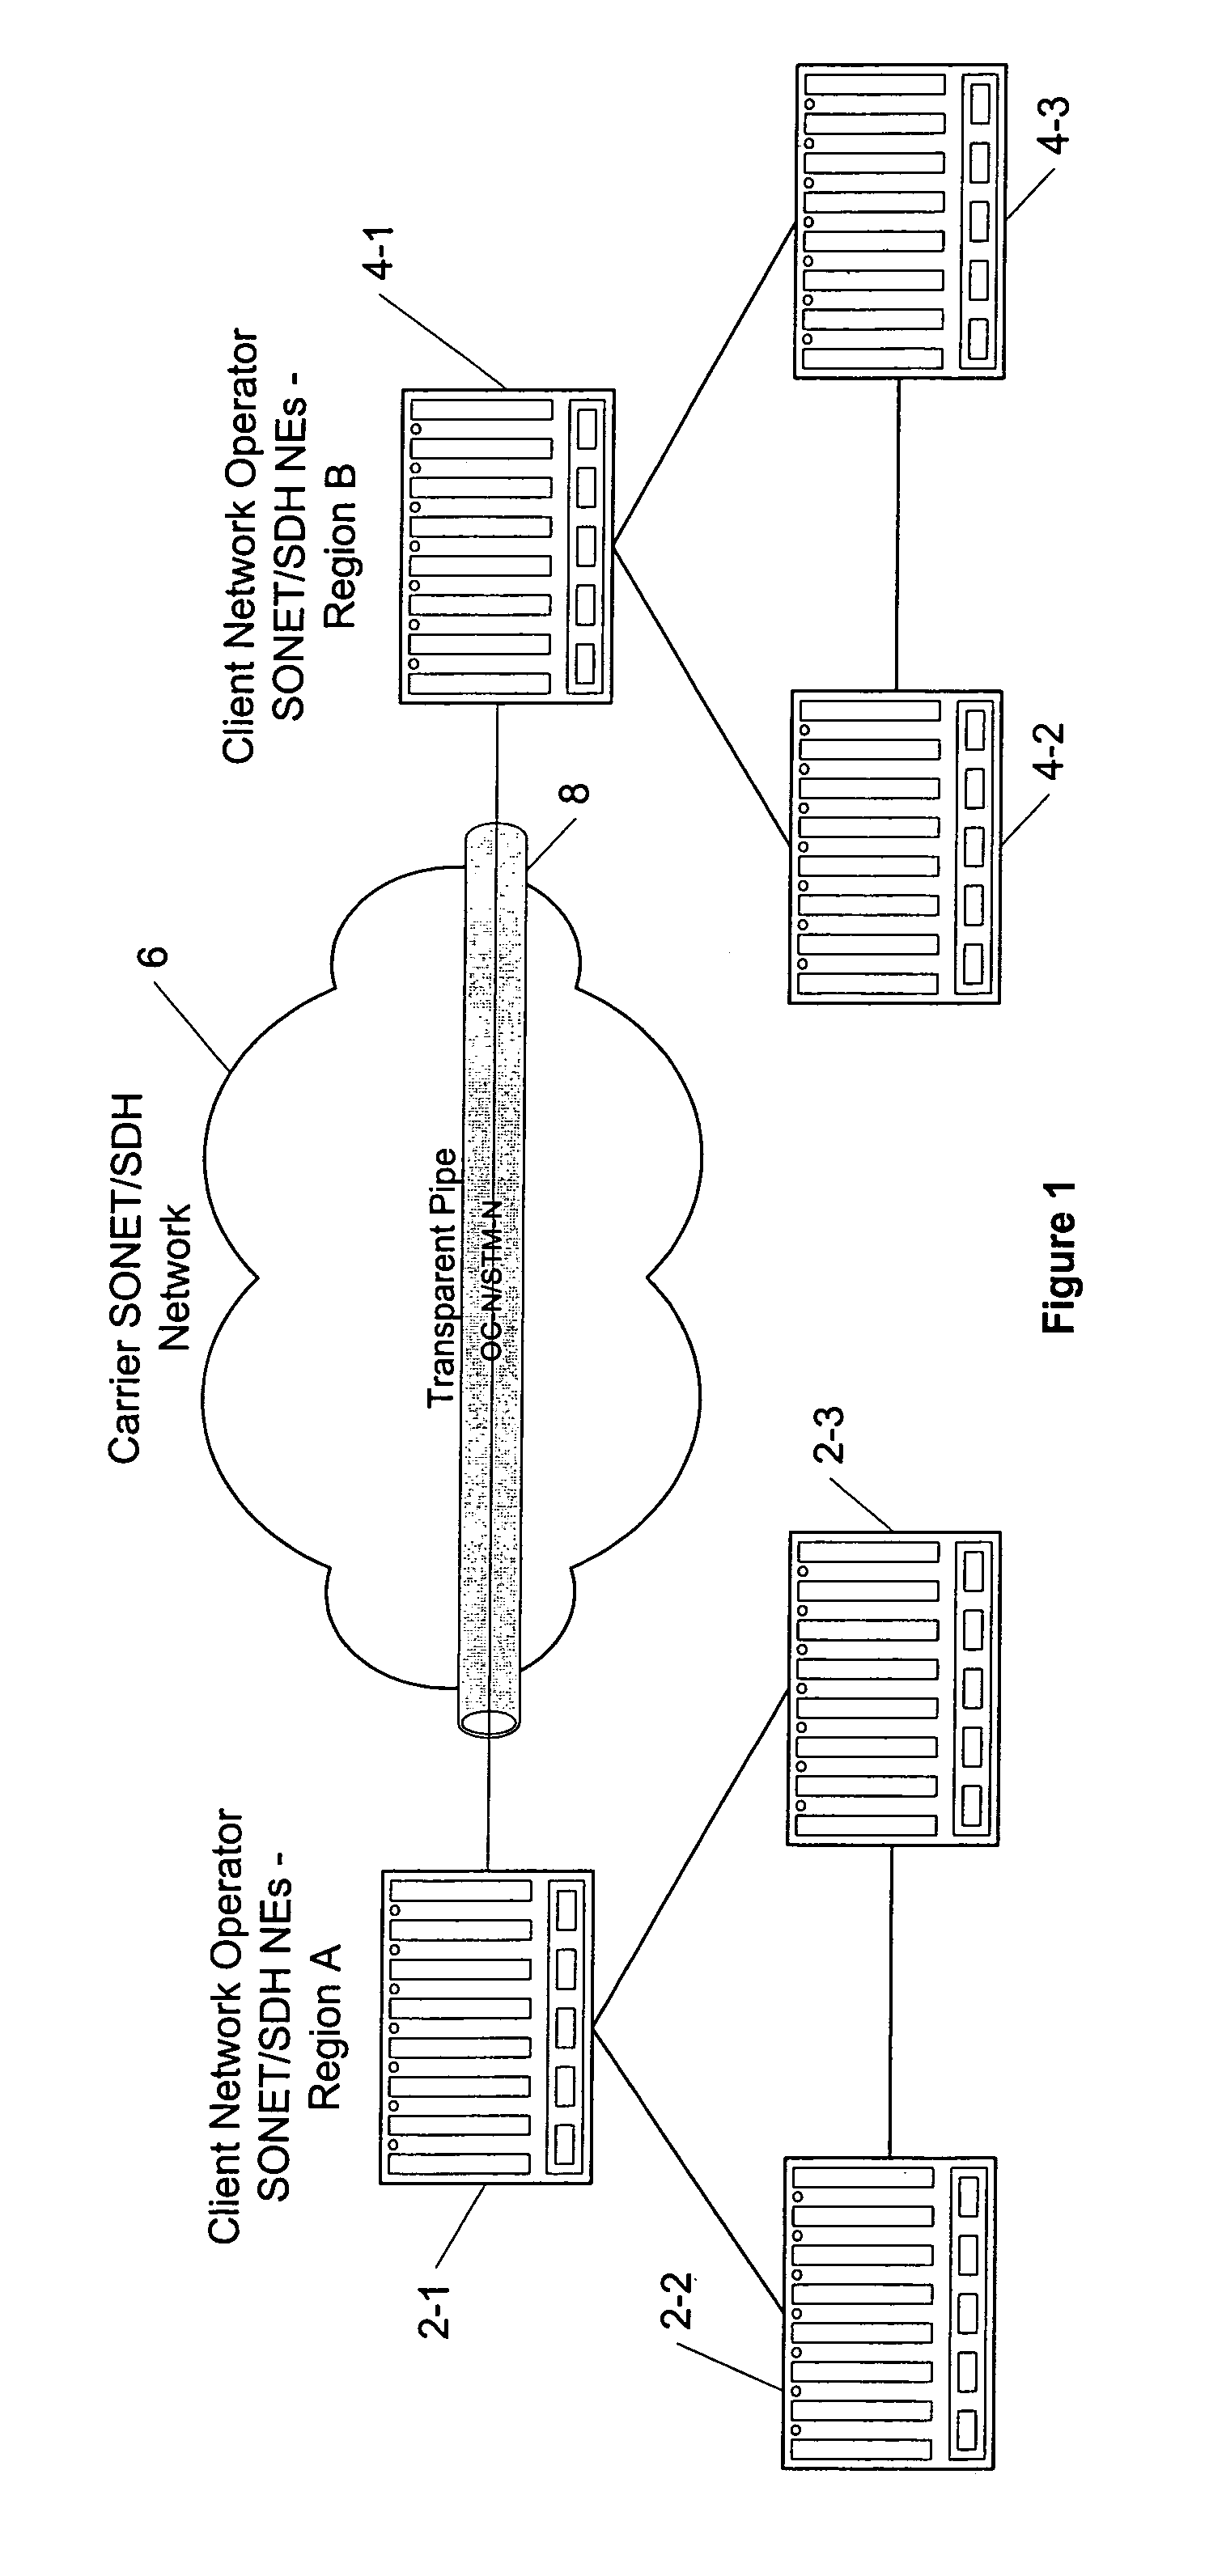 Methods and apparatus for transmitting synchronous data